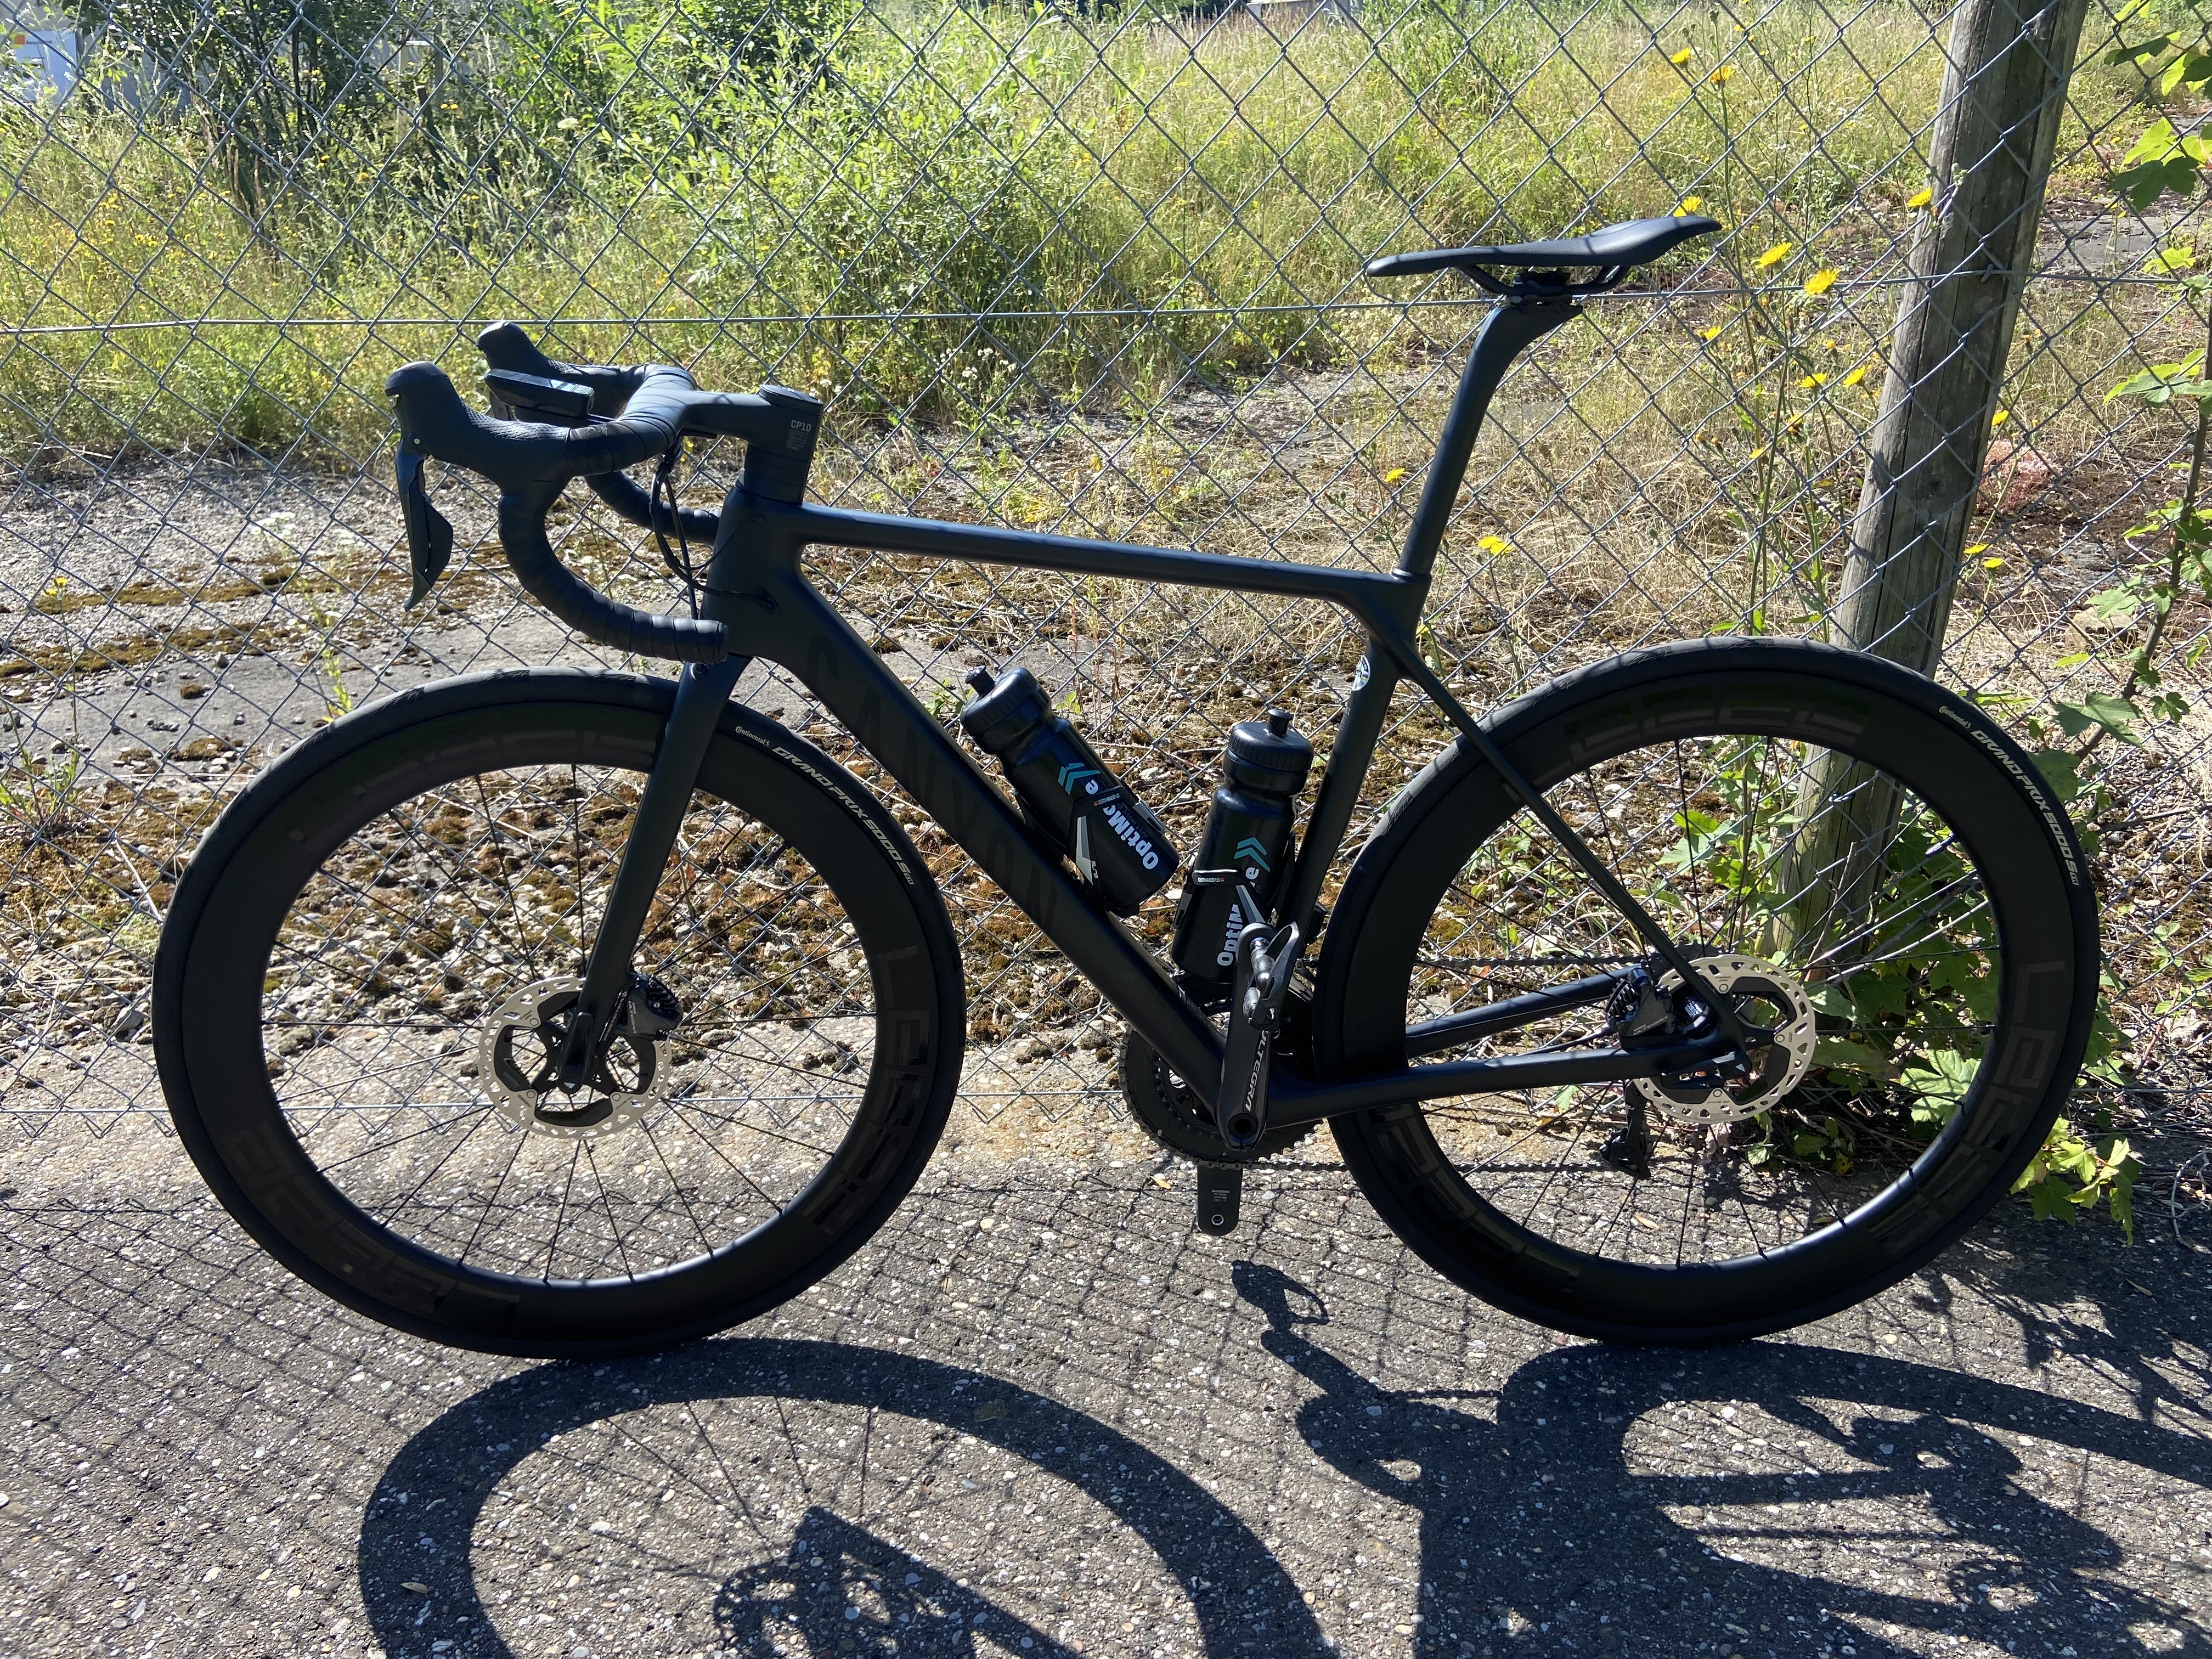 Canyon Ultimate CF SL 8 Disc Di2 used in s | buycycle